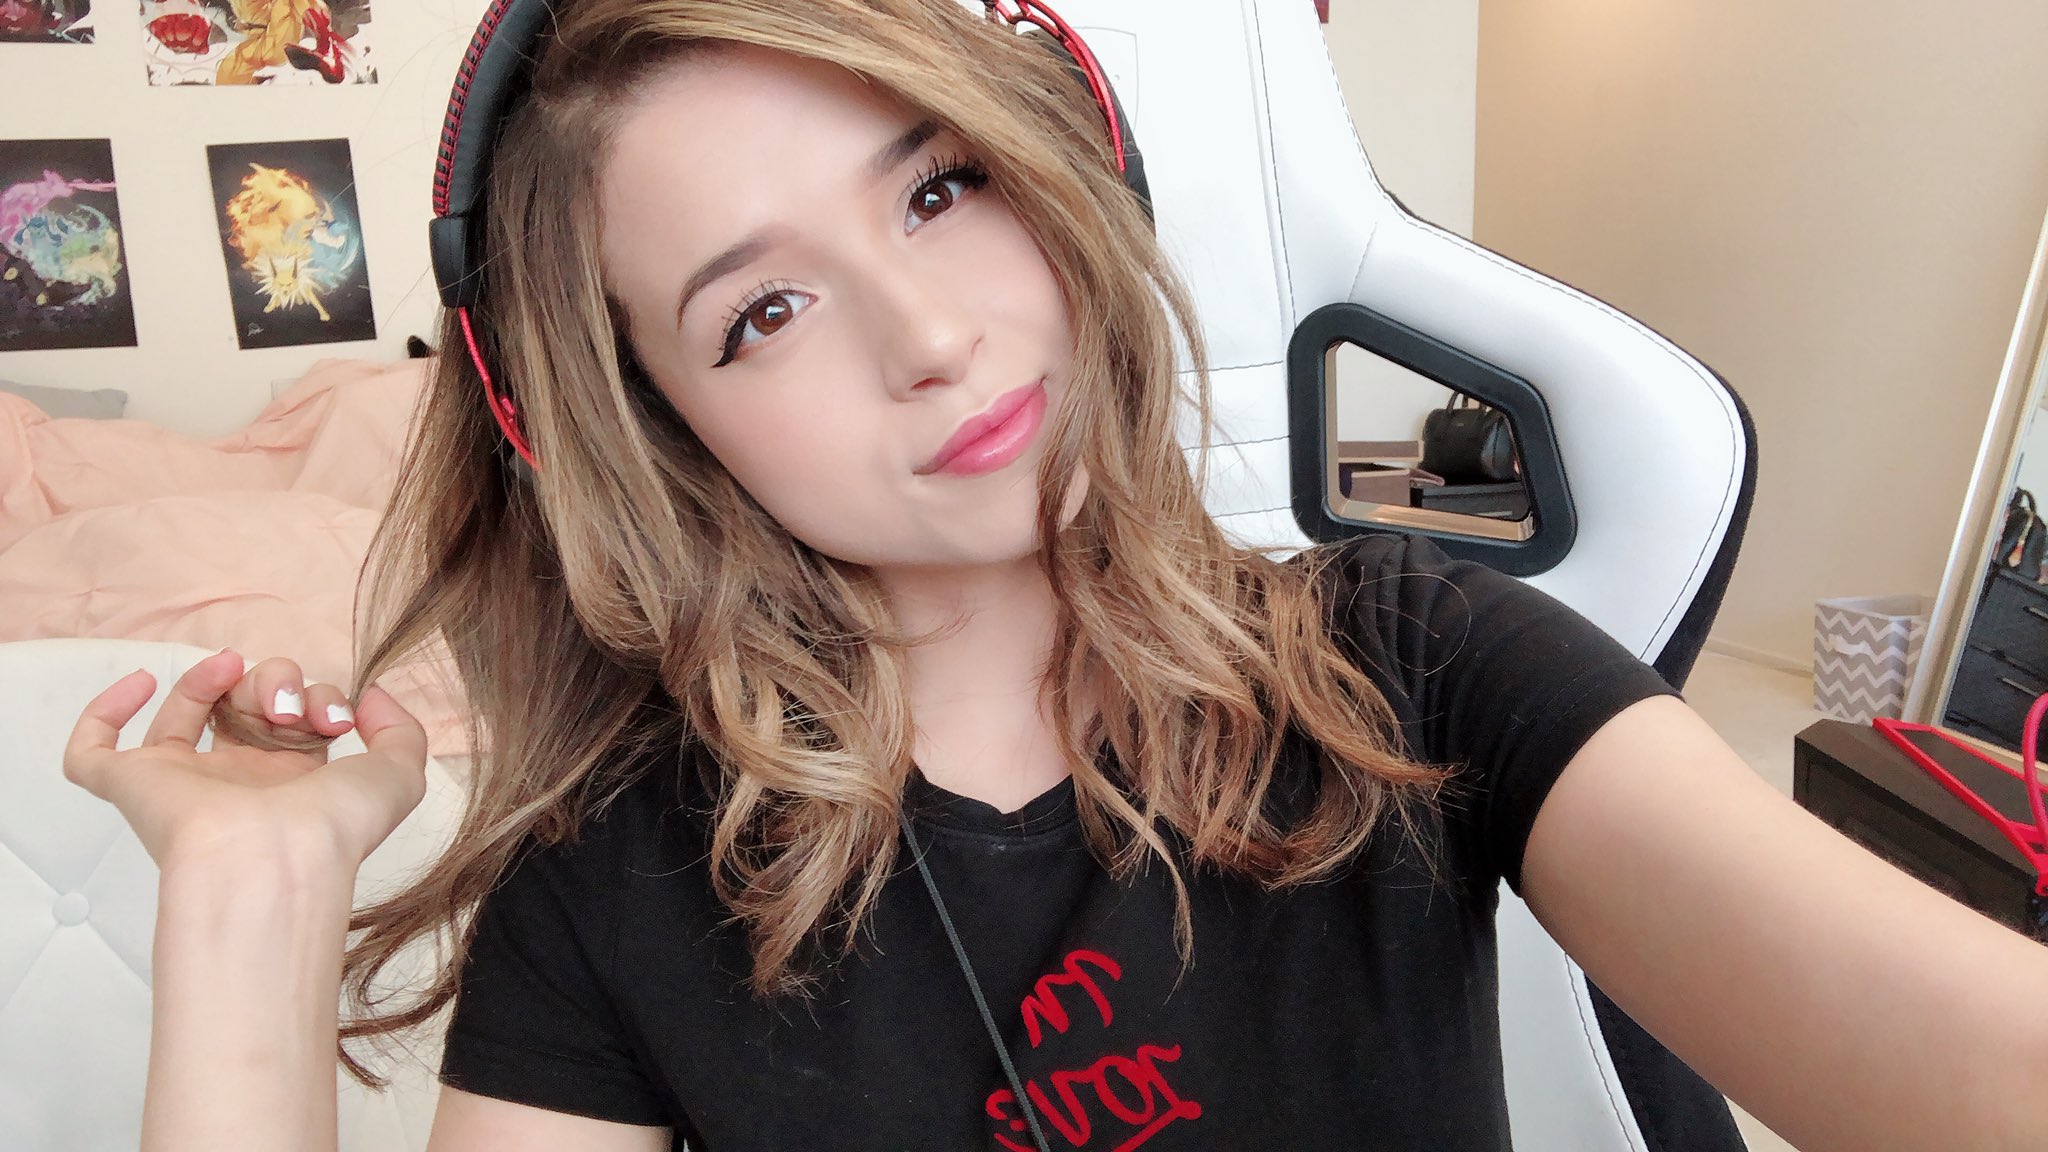 Dillon ✌ on Twitter: "Poki’s face is just. perfect 🥺 https://t.co/OAn...